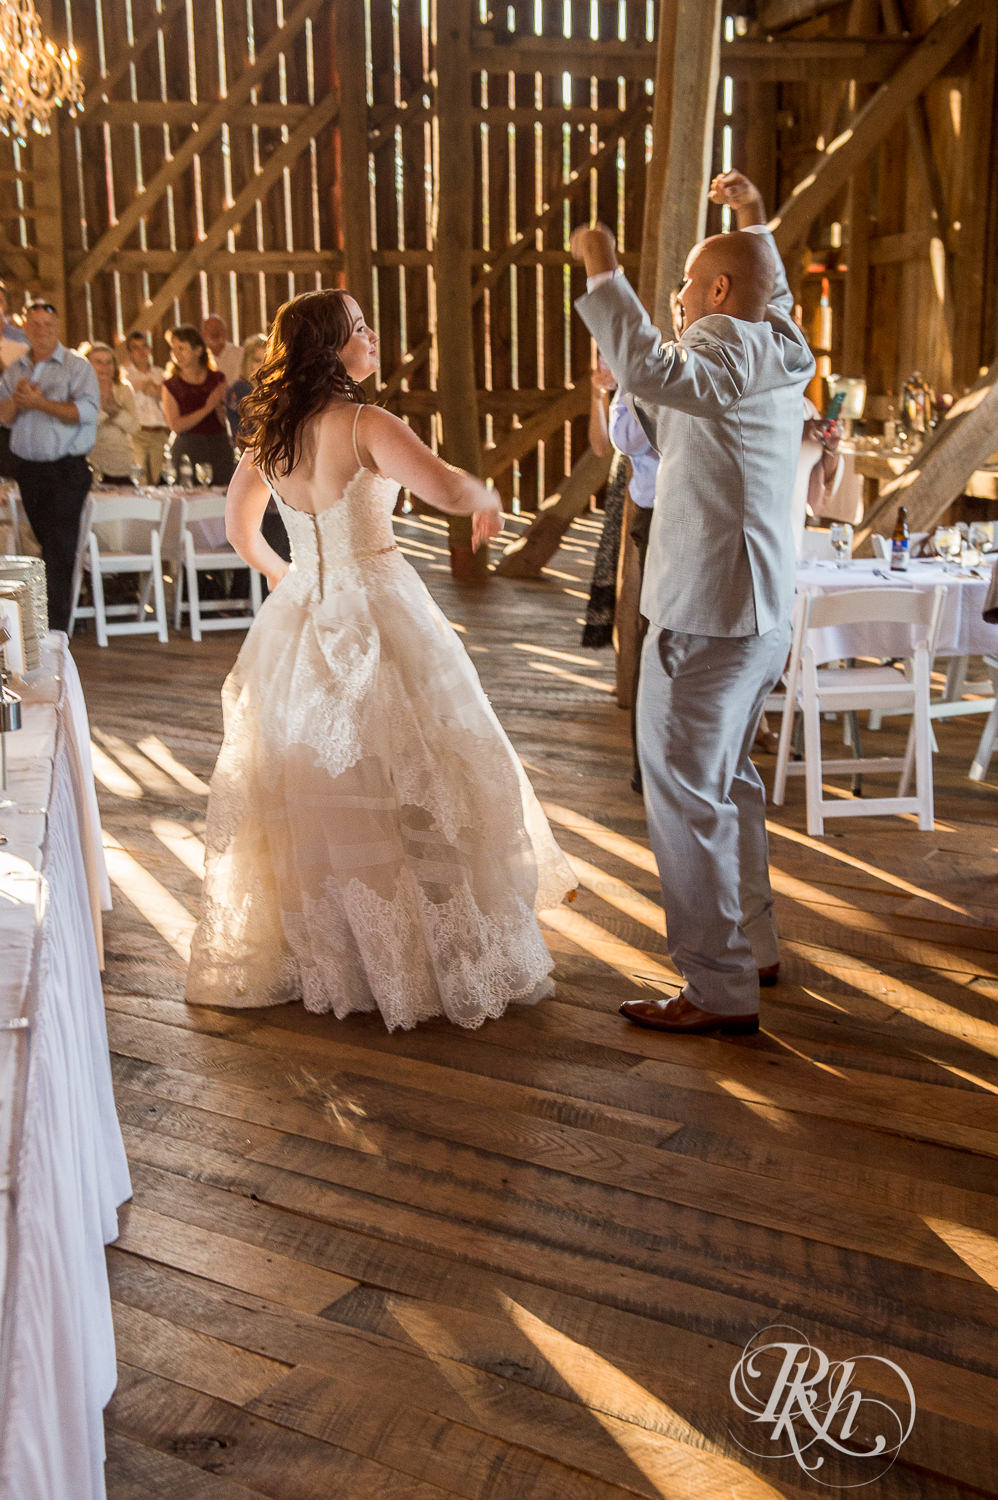 Bride and Asian groom enter wedding reception at Birch Hill Barn in Glenwood City, Wisconsin.